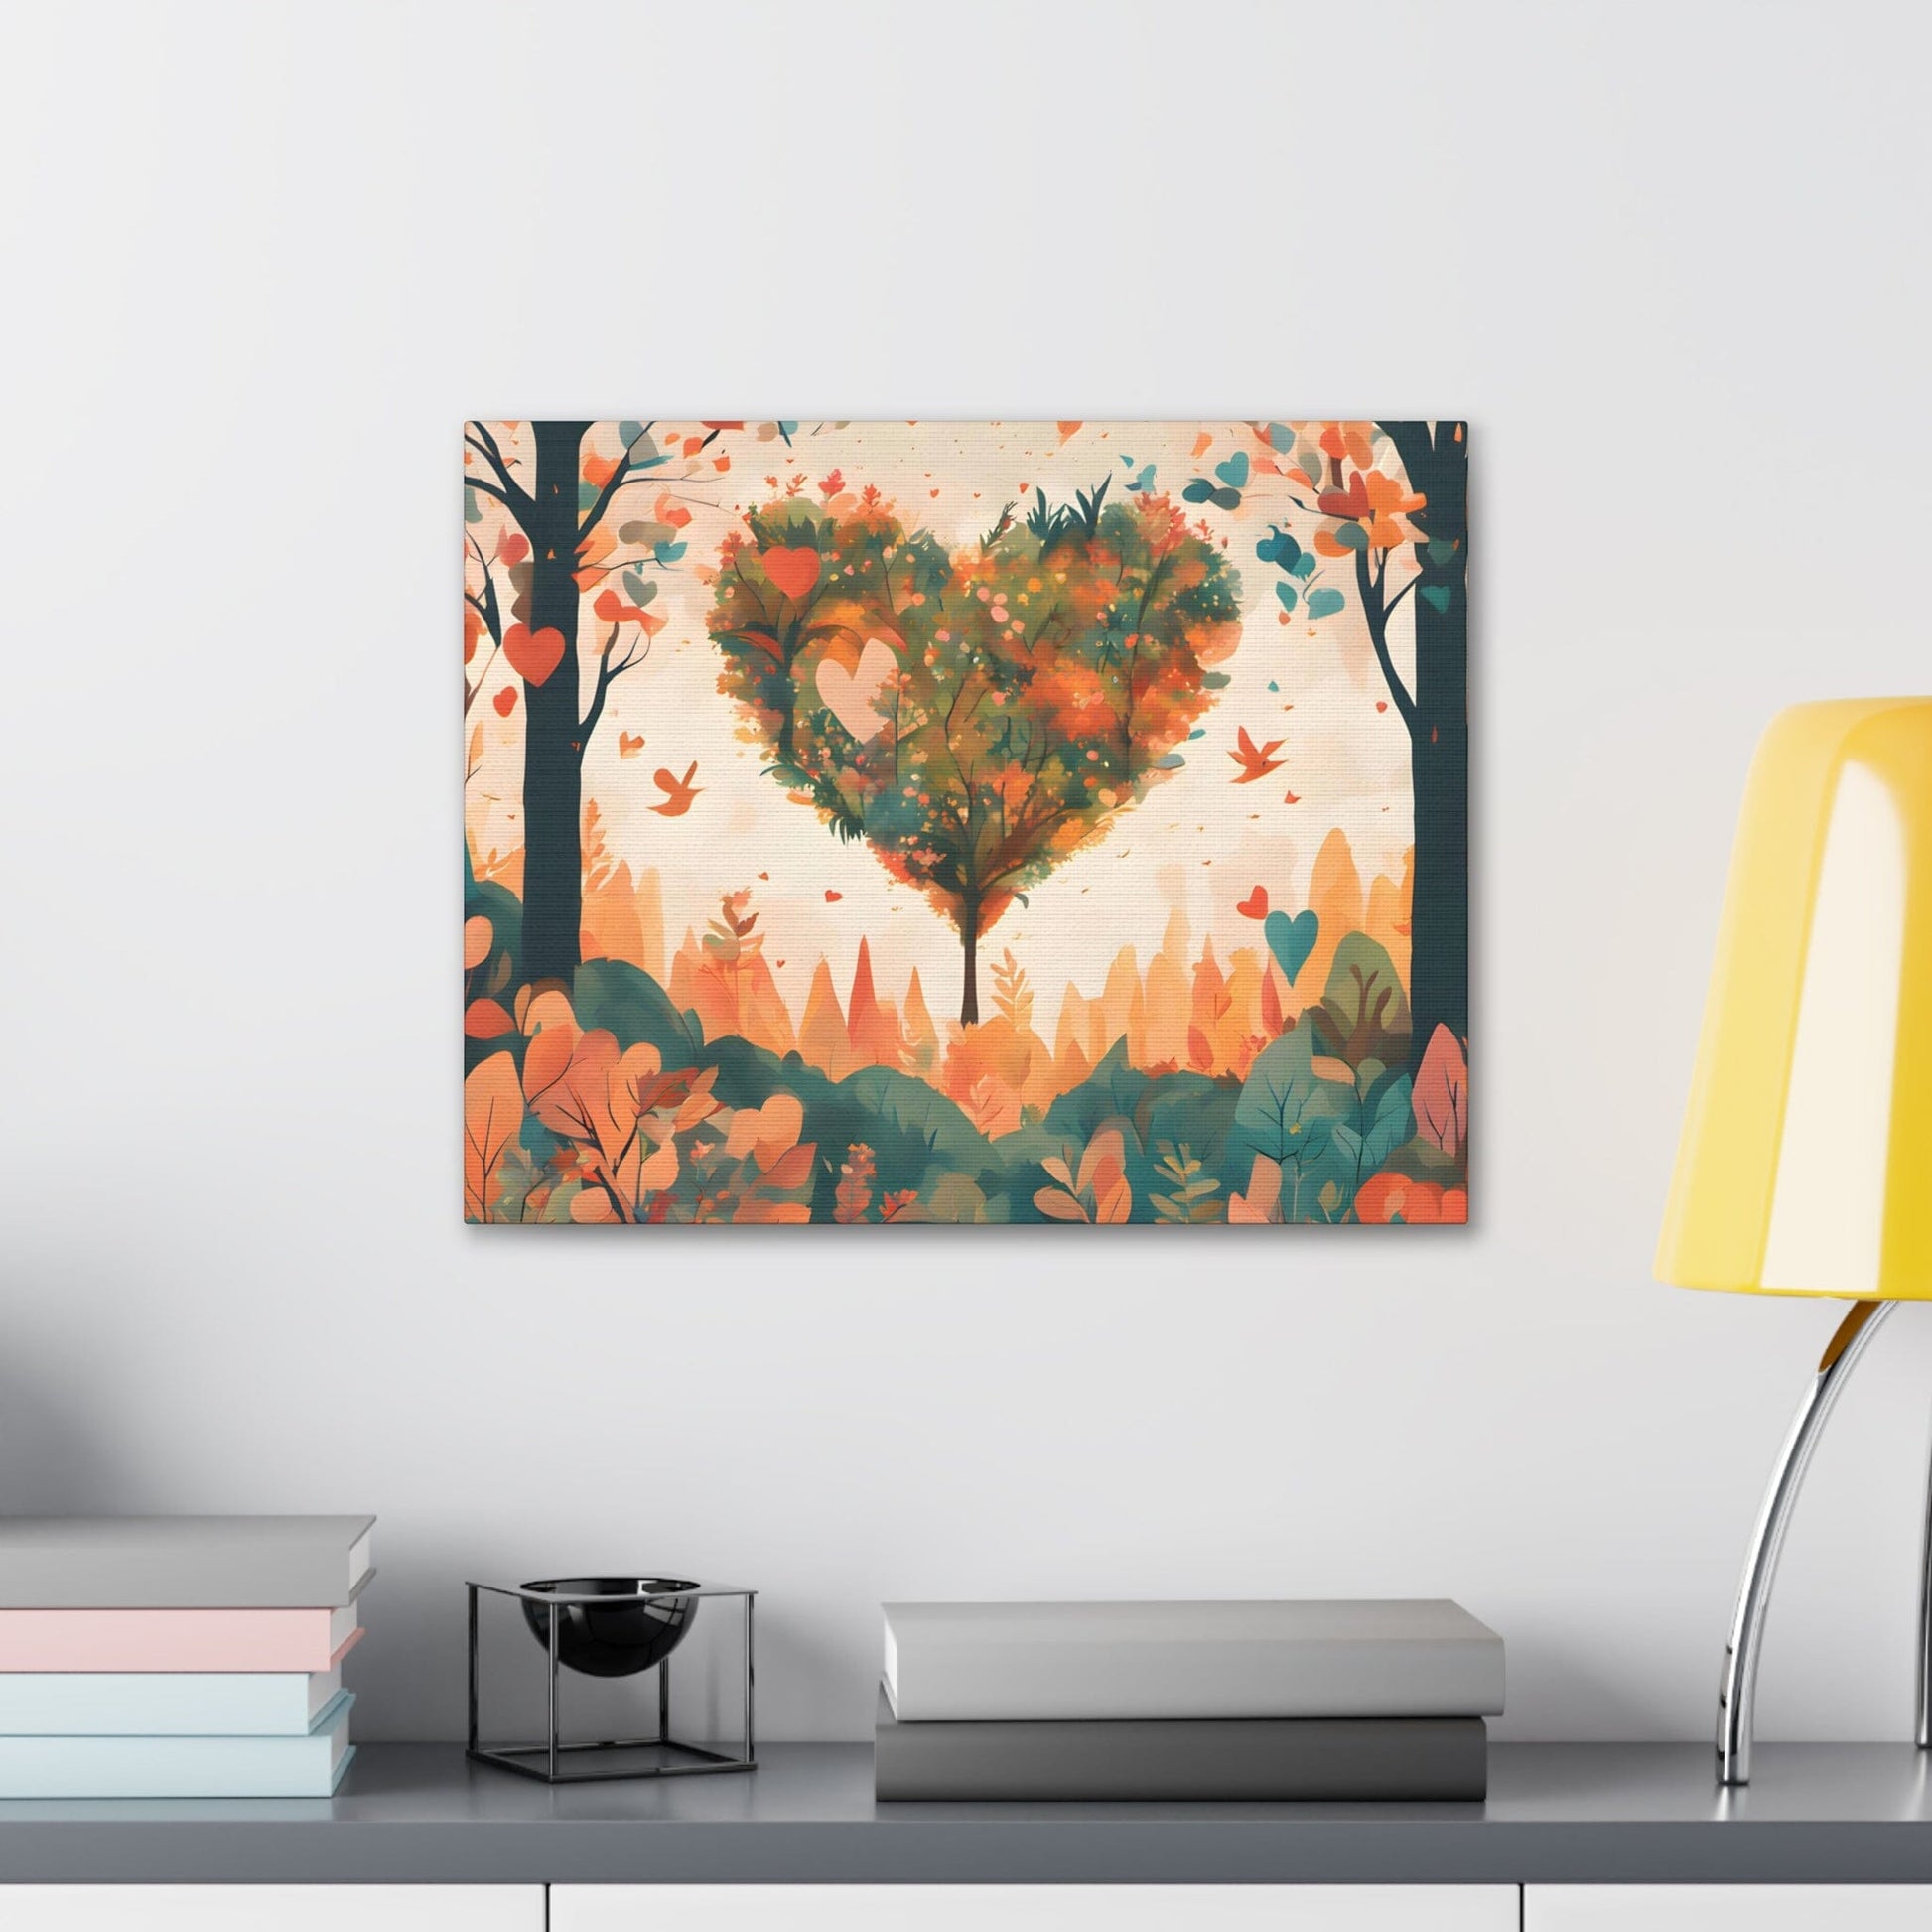 Susan Lyle. Harmony in Heartscape. Graphic Art Canvas